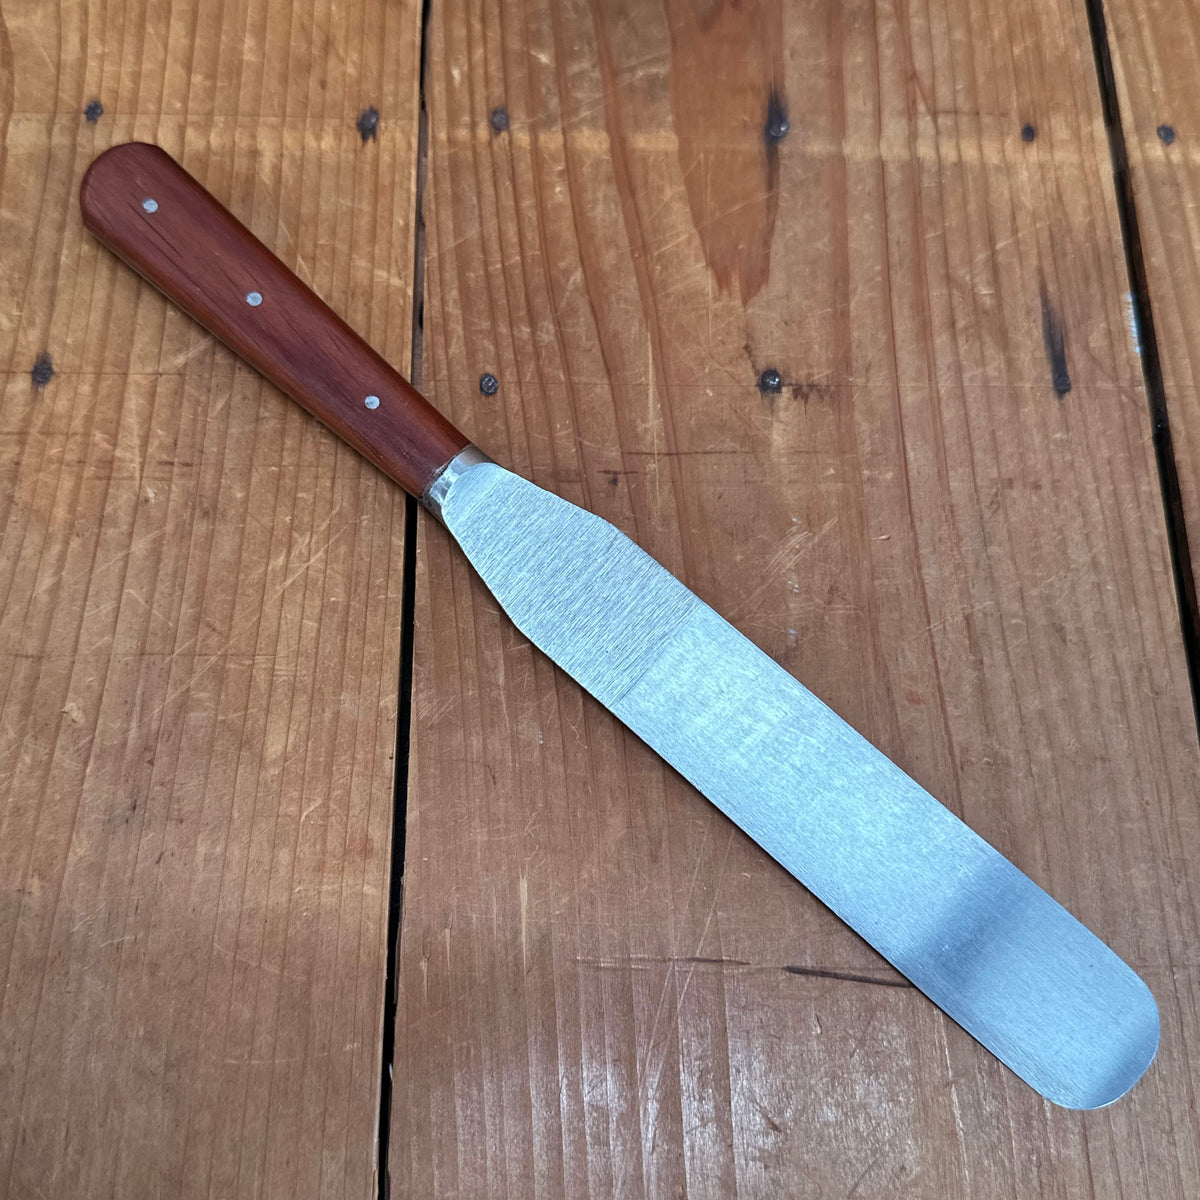 New Vintage A Wright 6" Spatula Forged STAINLESS Steel Rosewood Sheffield